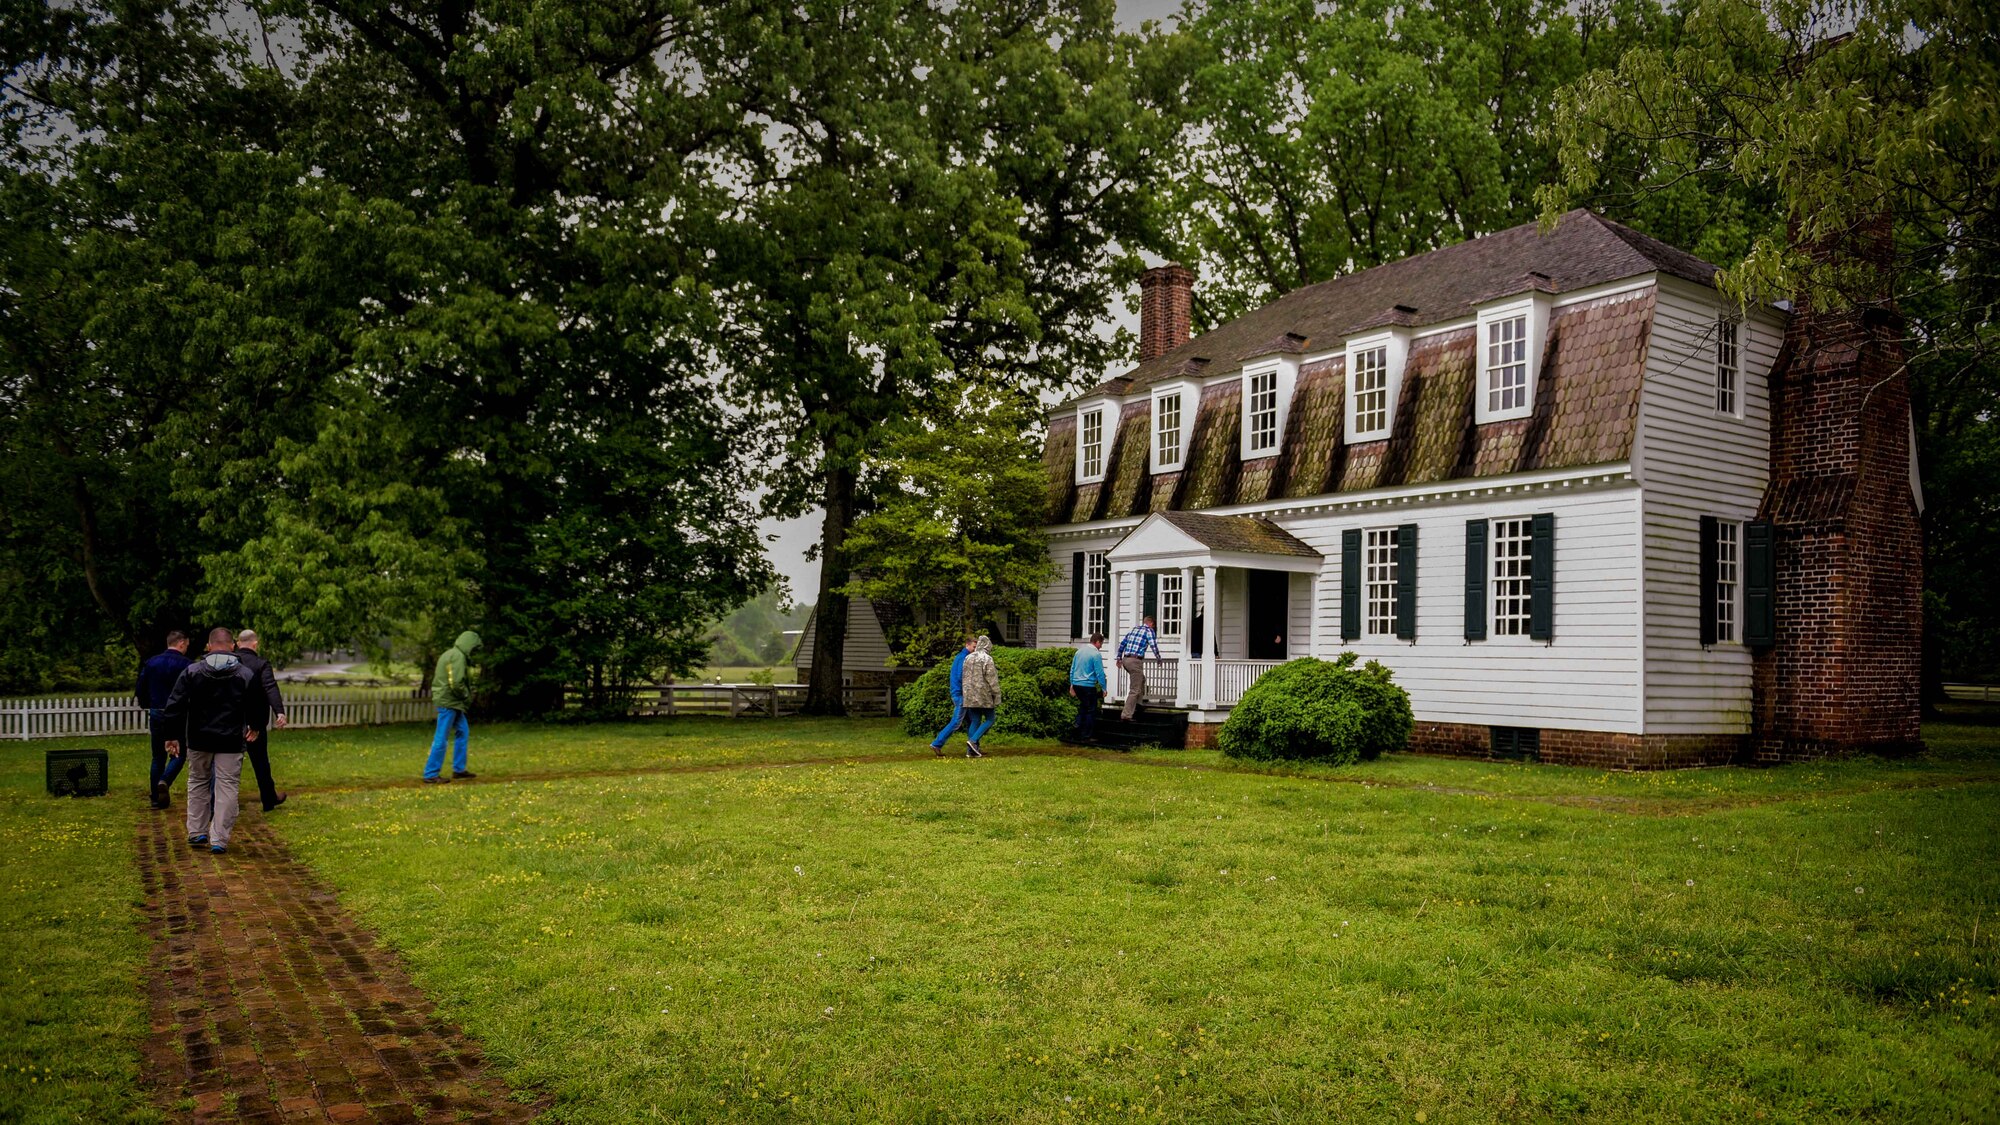 Members of the U.S. Air Force and both the French and Royal air force visit the Moore House at Yorktown Battlefield, Va., April 22, 2017. A few service members from the three nations took a trip to Yorktown Battlefield to learn about the Siege of Yorktown, a historical event in the trio of nations’ past. (U.S. Air Force photo/Staff Sgt. Areca T. Bell)